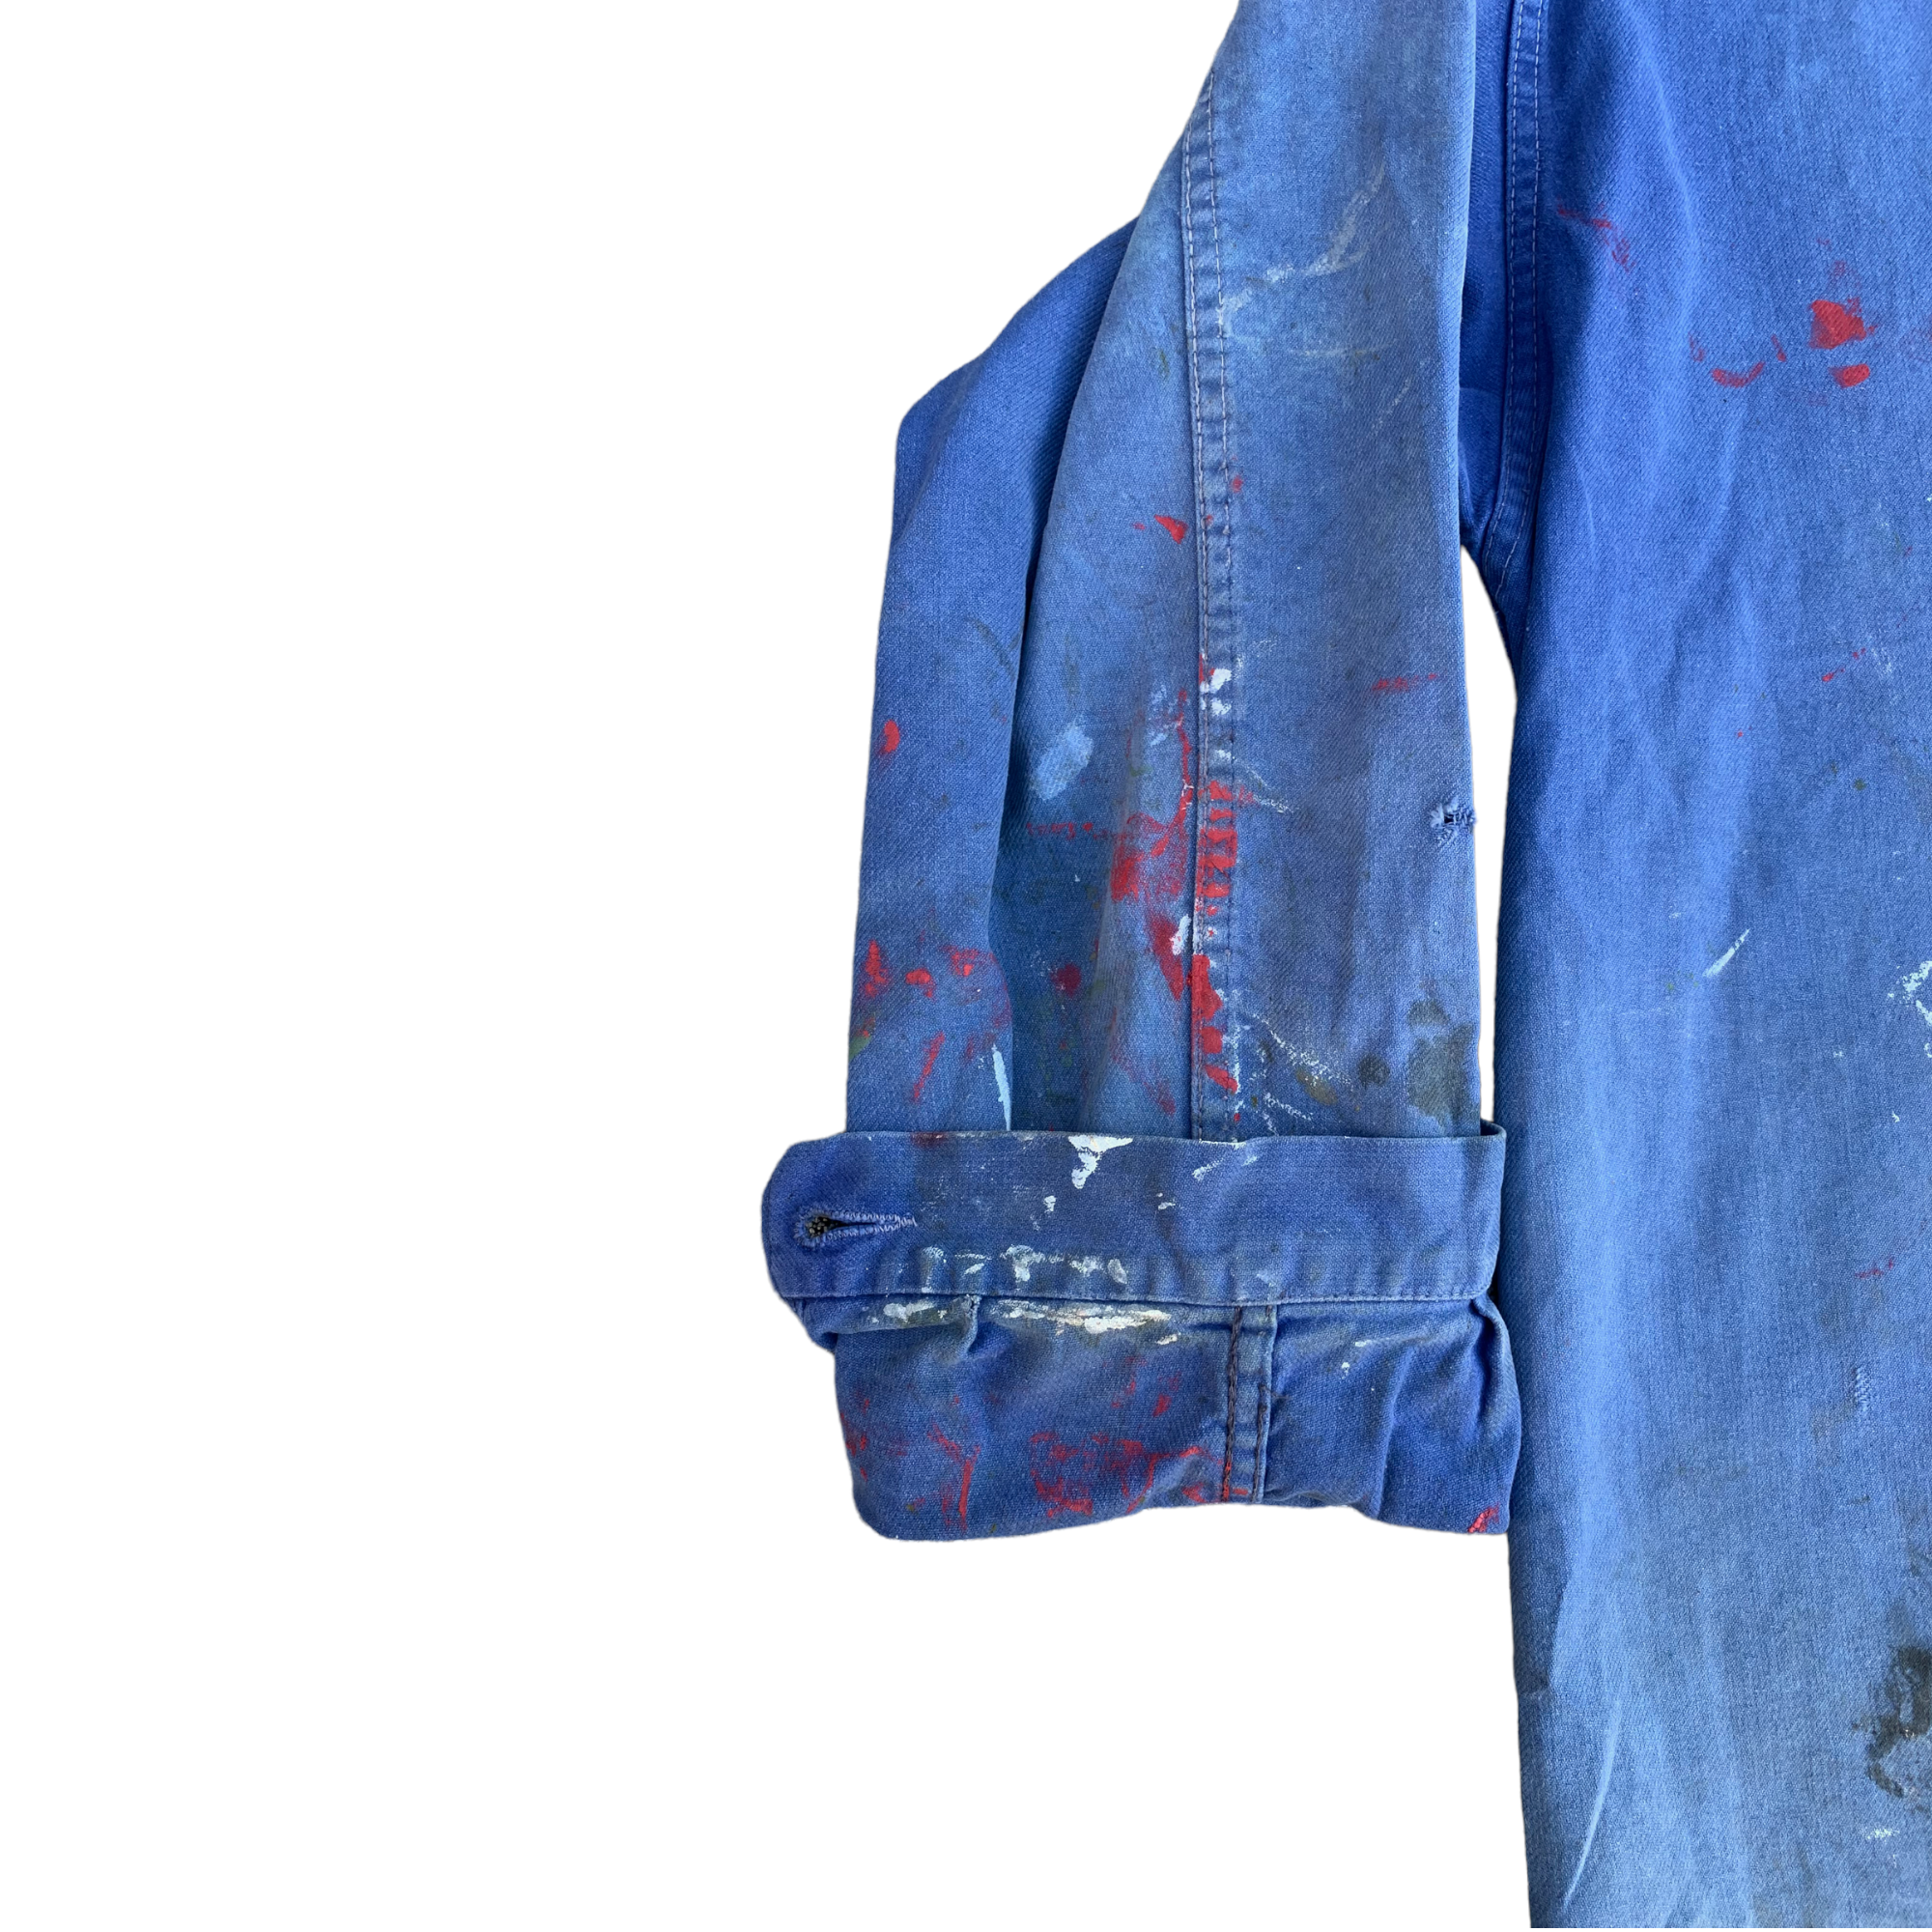 1970s French Work Jacket with Metal Buttons, Embroidered Logo, and Paint Distressing - Faded Blue - L/XL